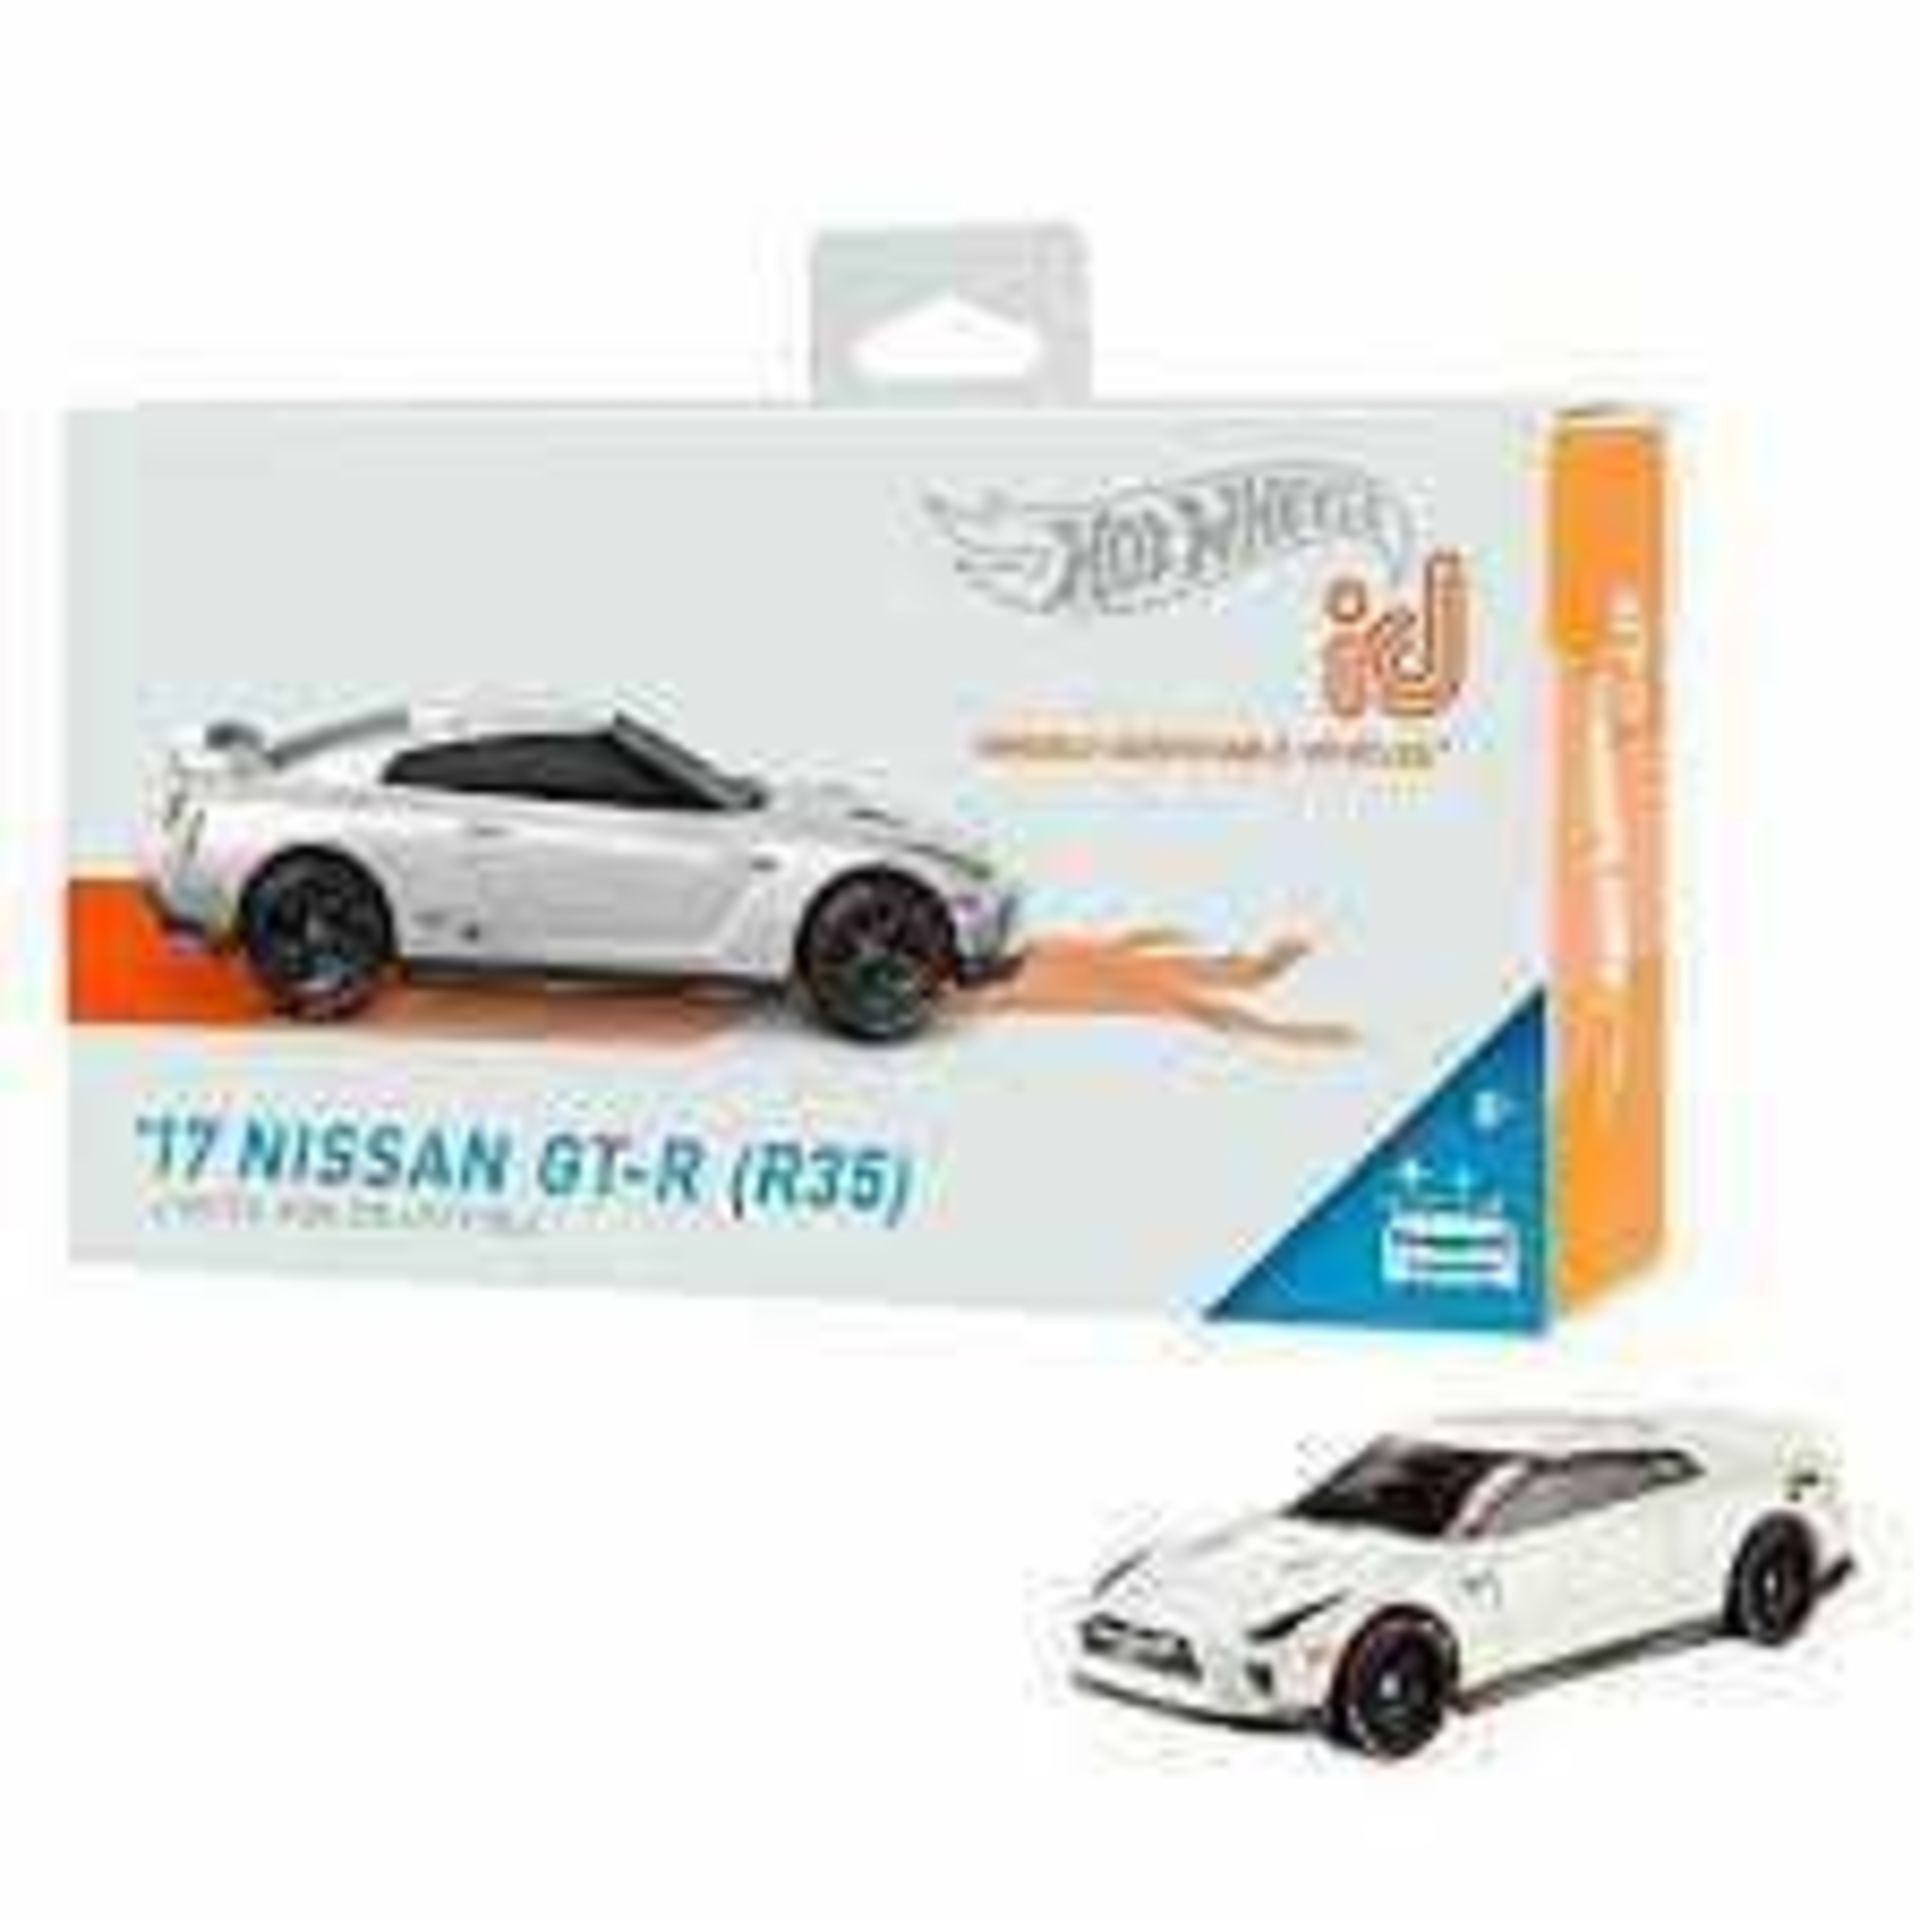 Combined RRP £100. Lot To Contained '17 Nissan Gt-R (R35) Hotwheels Id Vehicles